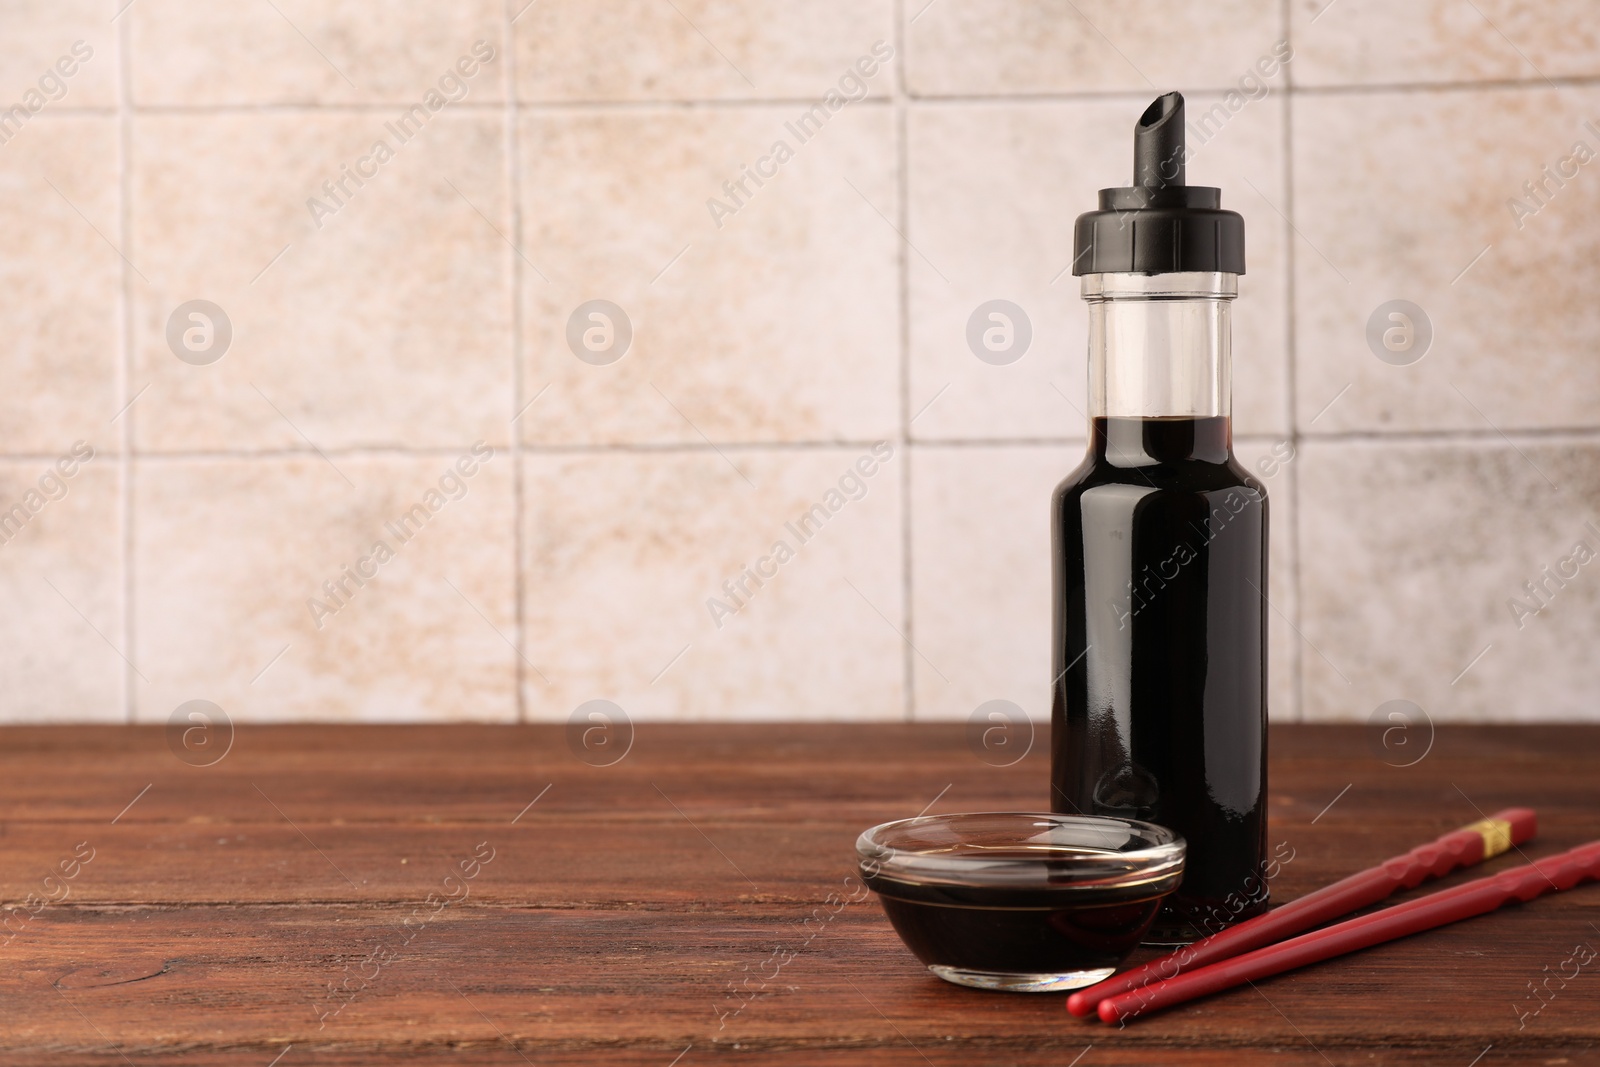 Photo of Bottle, bowl with soy sauce and chopsticks on wooden table. Space for text